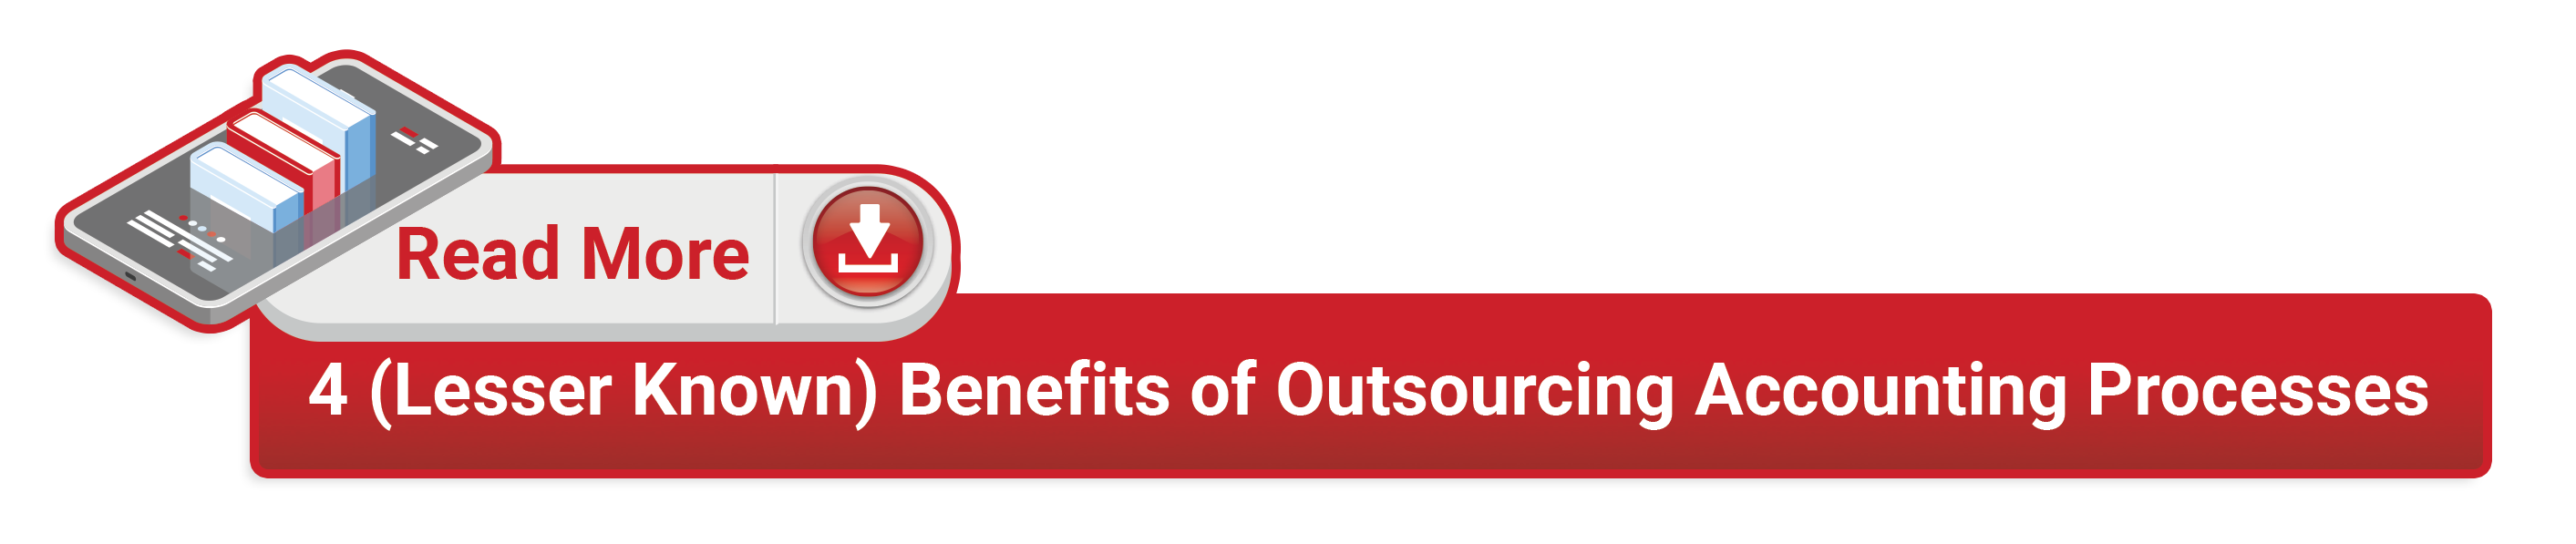 Infinit-O blog outsourcing accounting processes